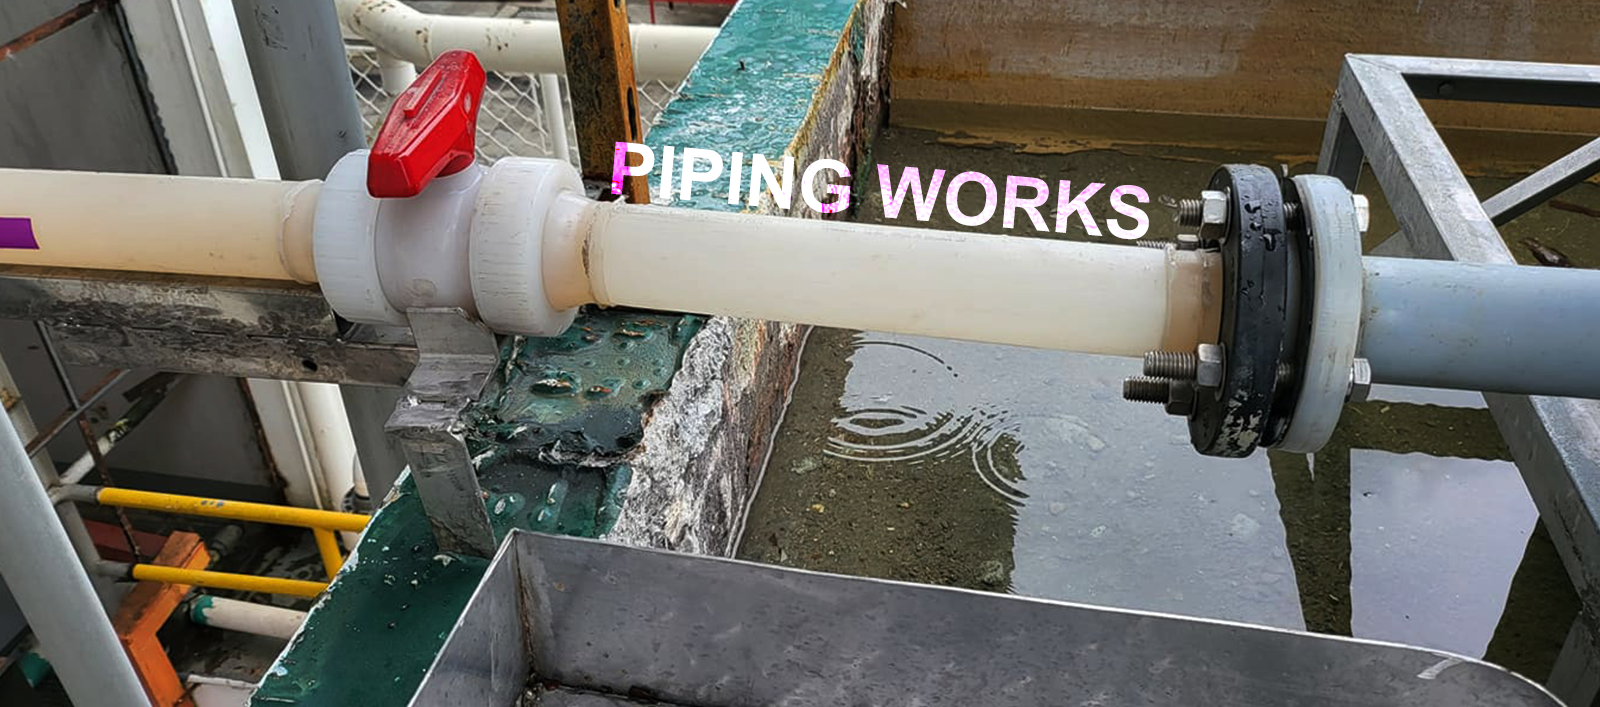 Piping Works Services